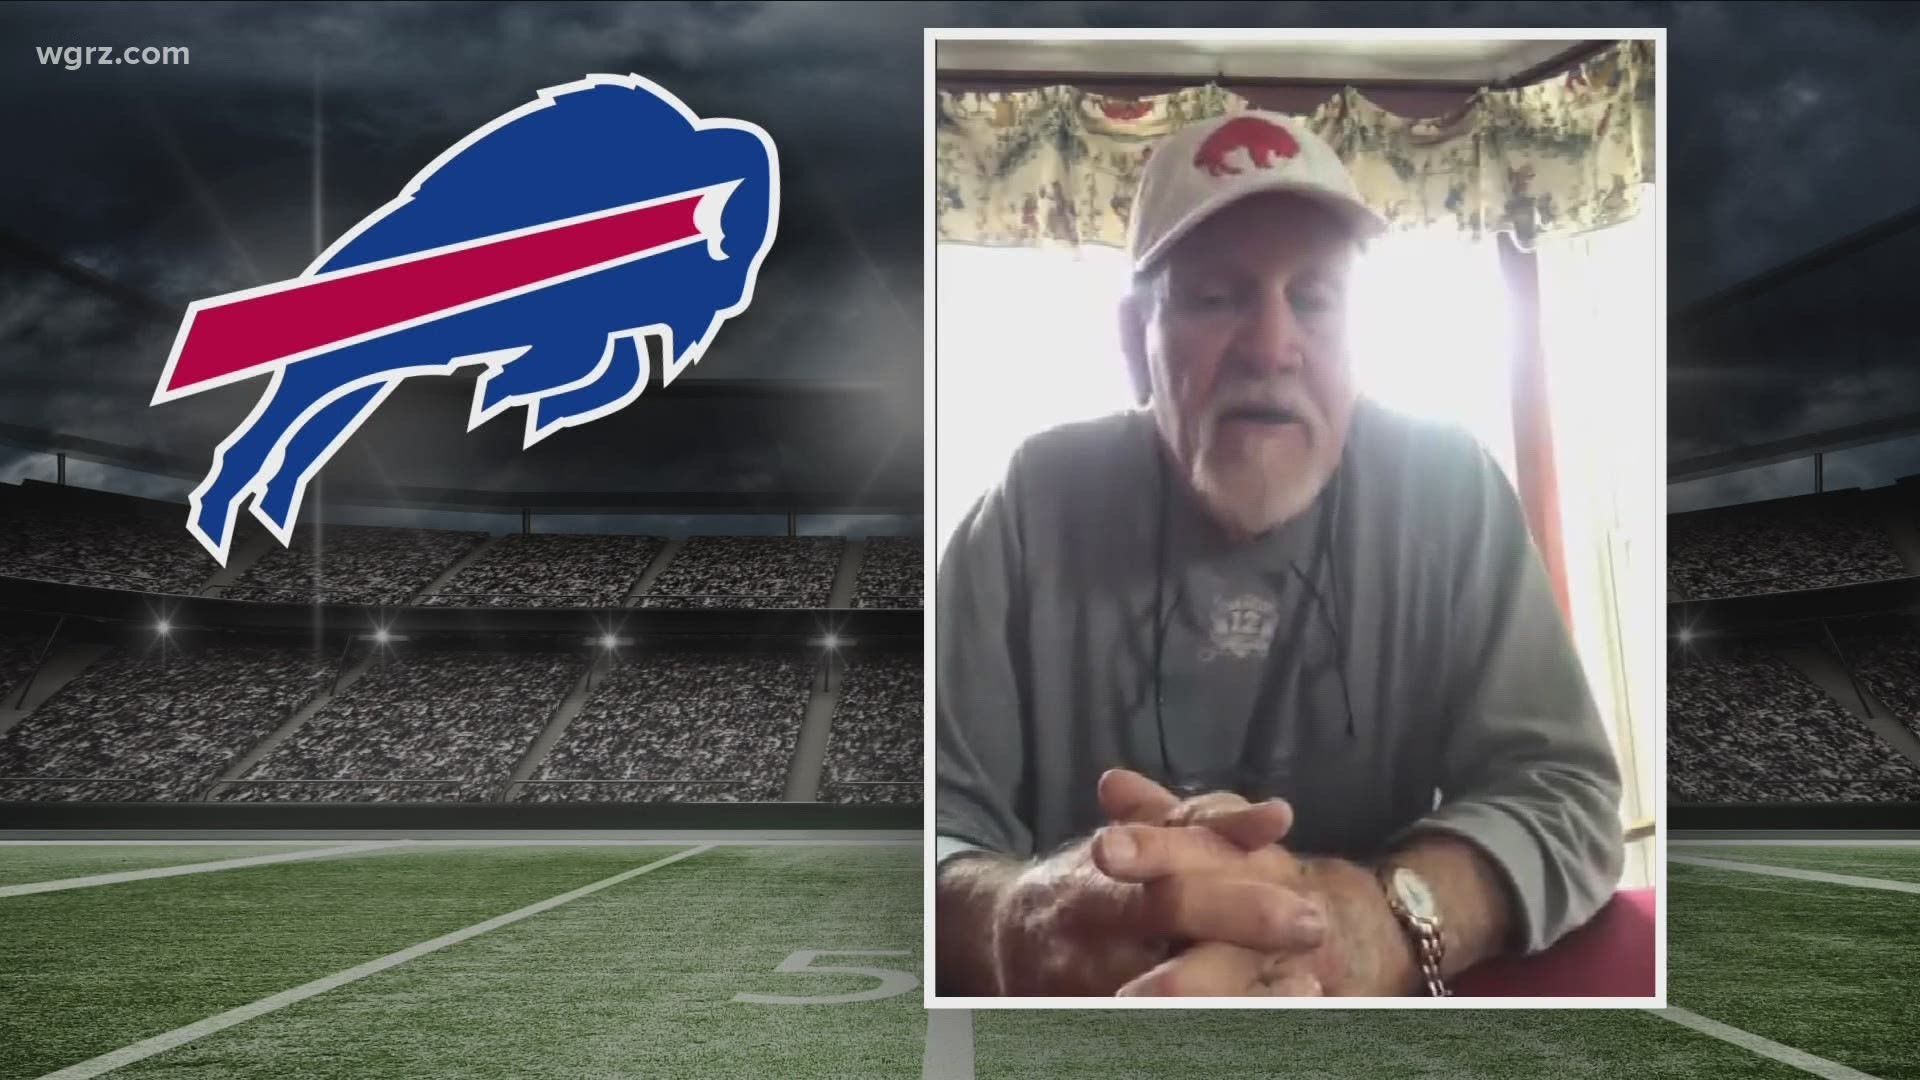 Today's game is exciting for fans and for those who used put on Bills uniforms. We spoke with a few of the Bills greats.